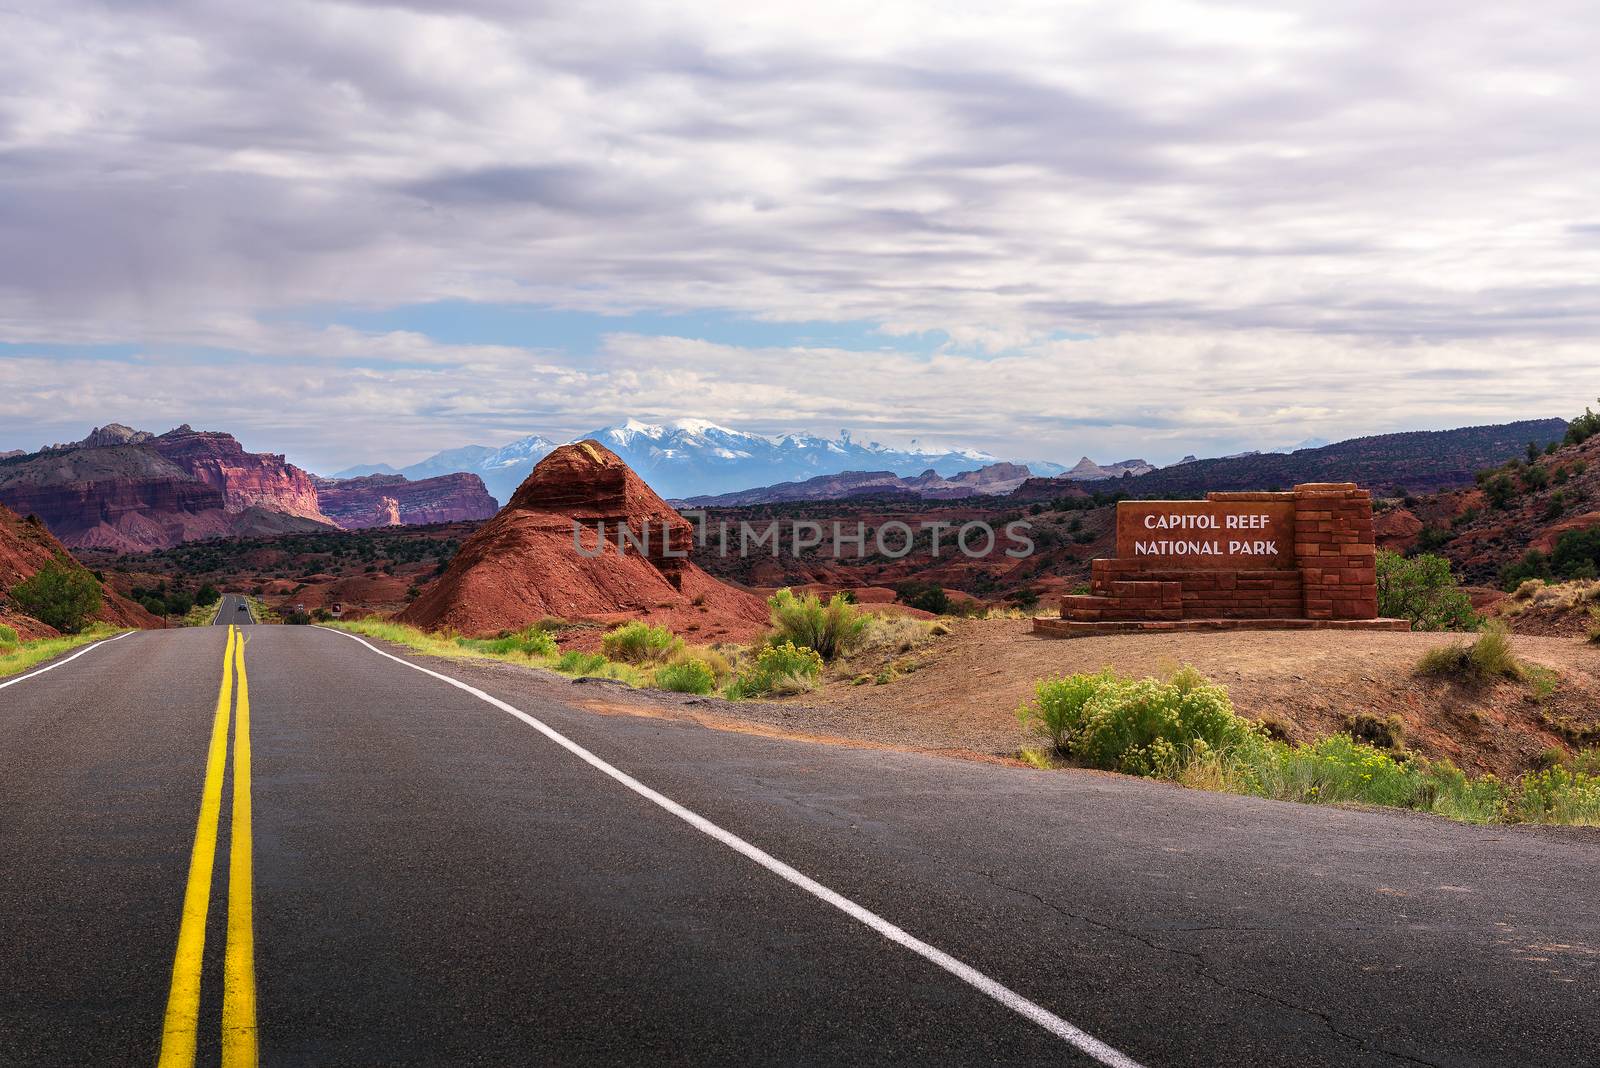 Welcome sign at the entrance to Capitol Reef National park, Utah, with snow covered Rocky Mountains in the background.